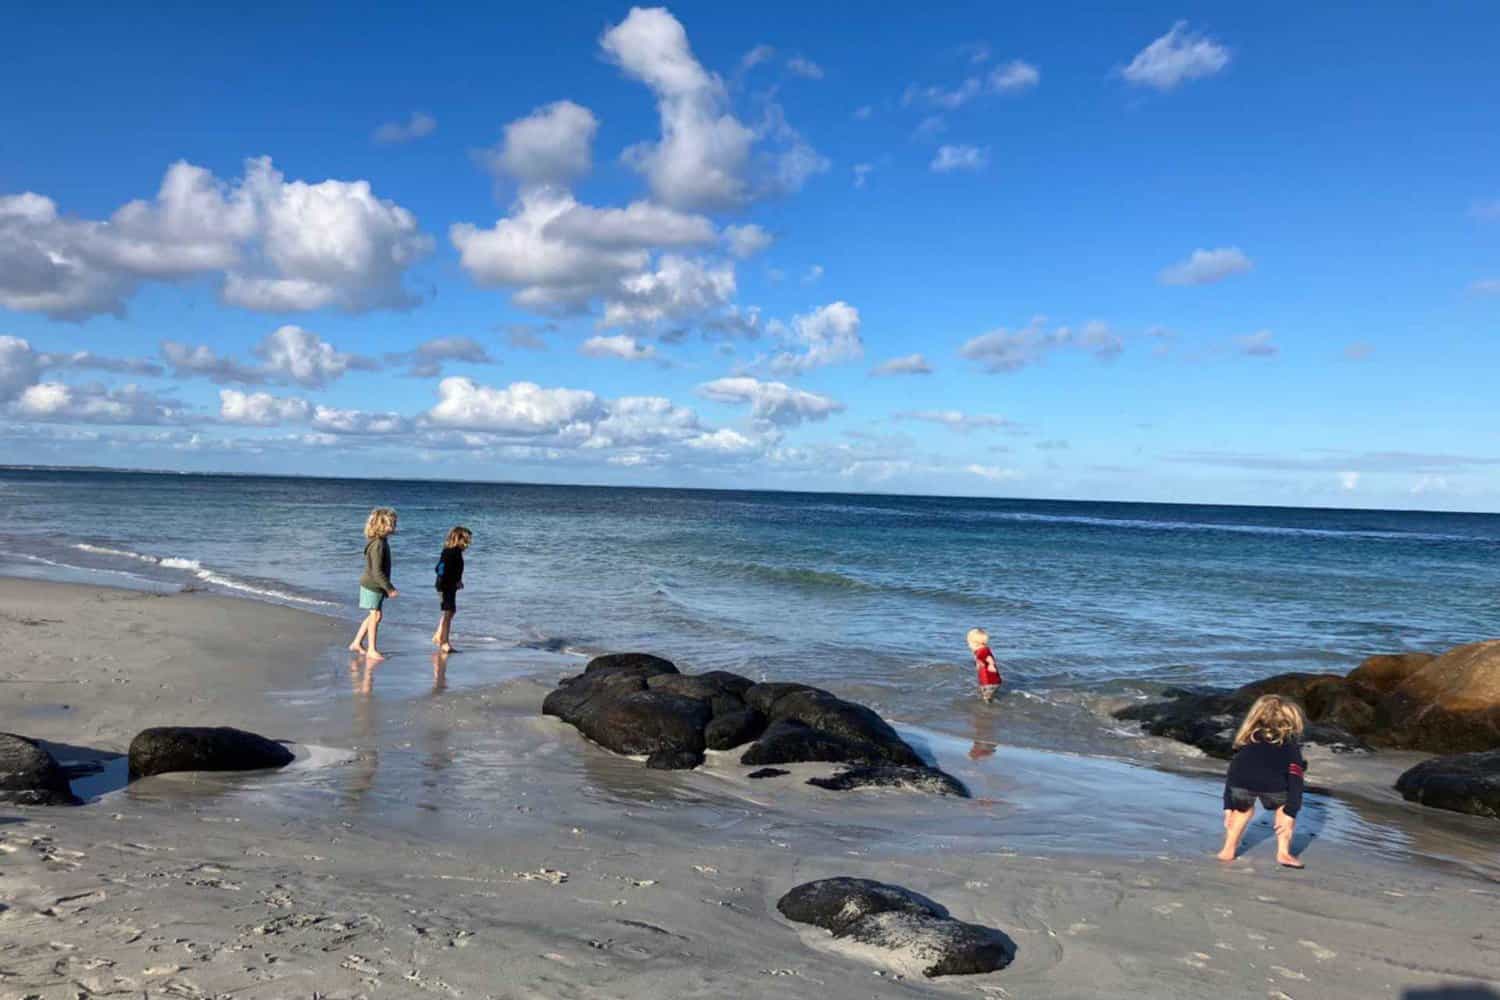 Children wade and play near the water's edge on an Augusta beach, Dead Finish, with natural black rocks embedded in the sand, under a sky dotted with cotton-like clouds, offering a snapshot of family moments by the sea